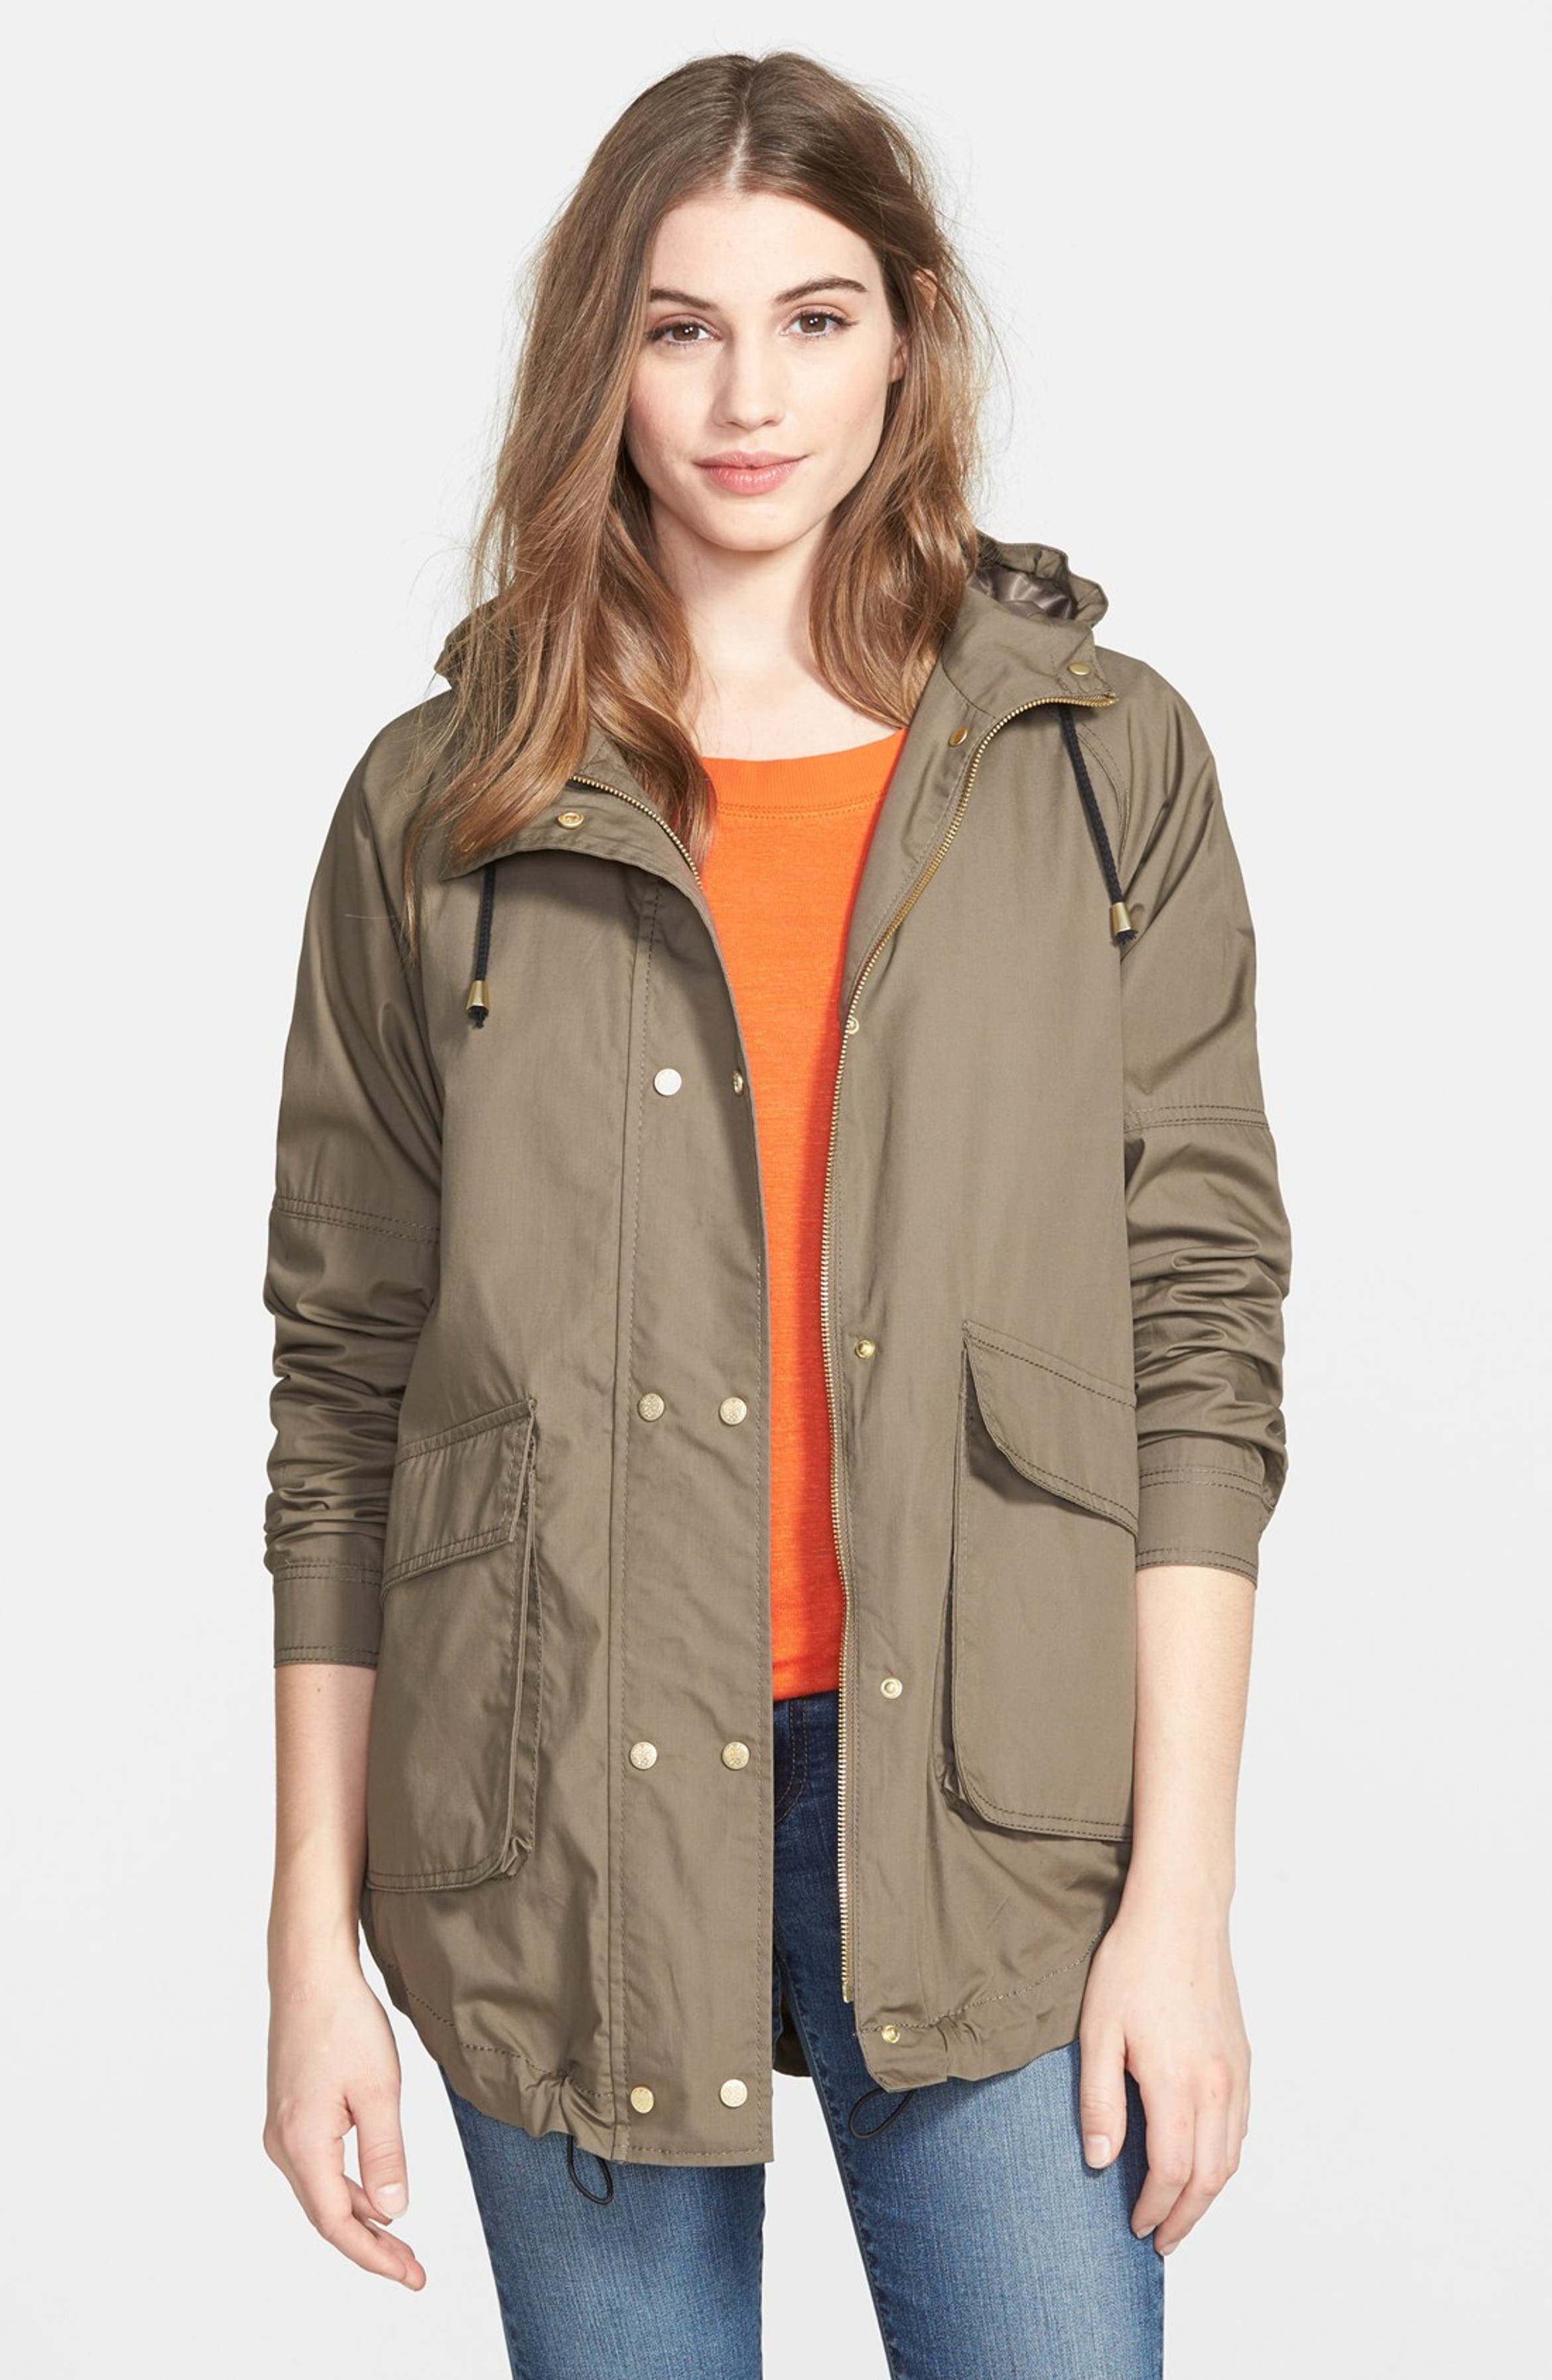 Vince Camuto Hooded Cotton Blouson Jacket | Nordstrom